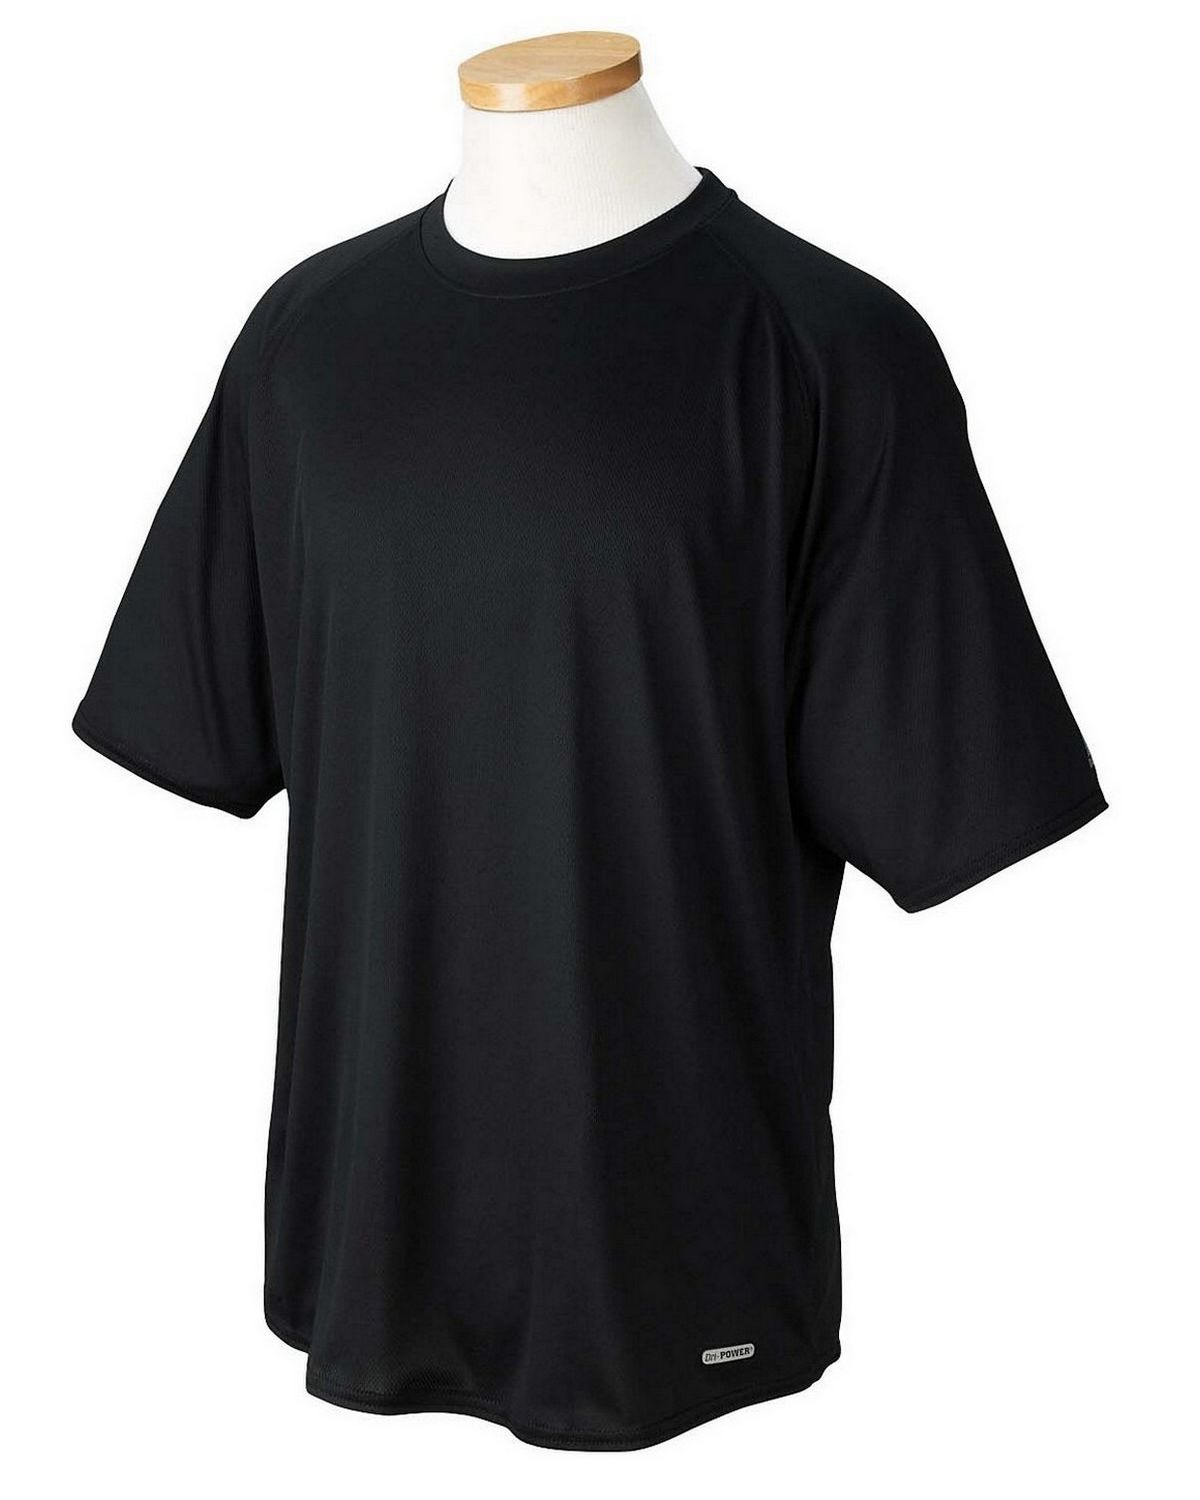 russell athletic dri power shirts